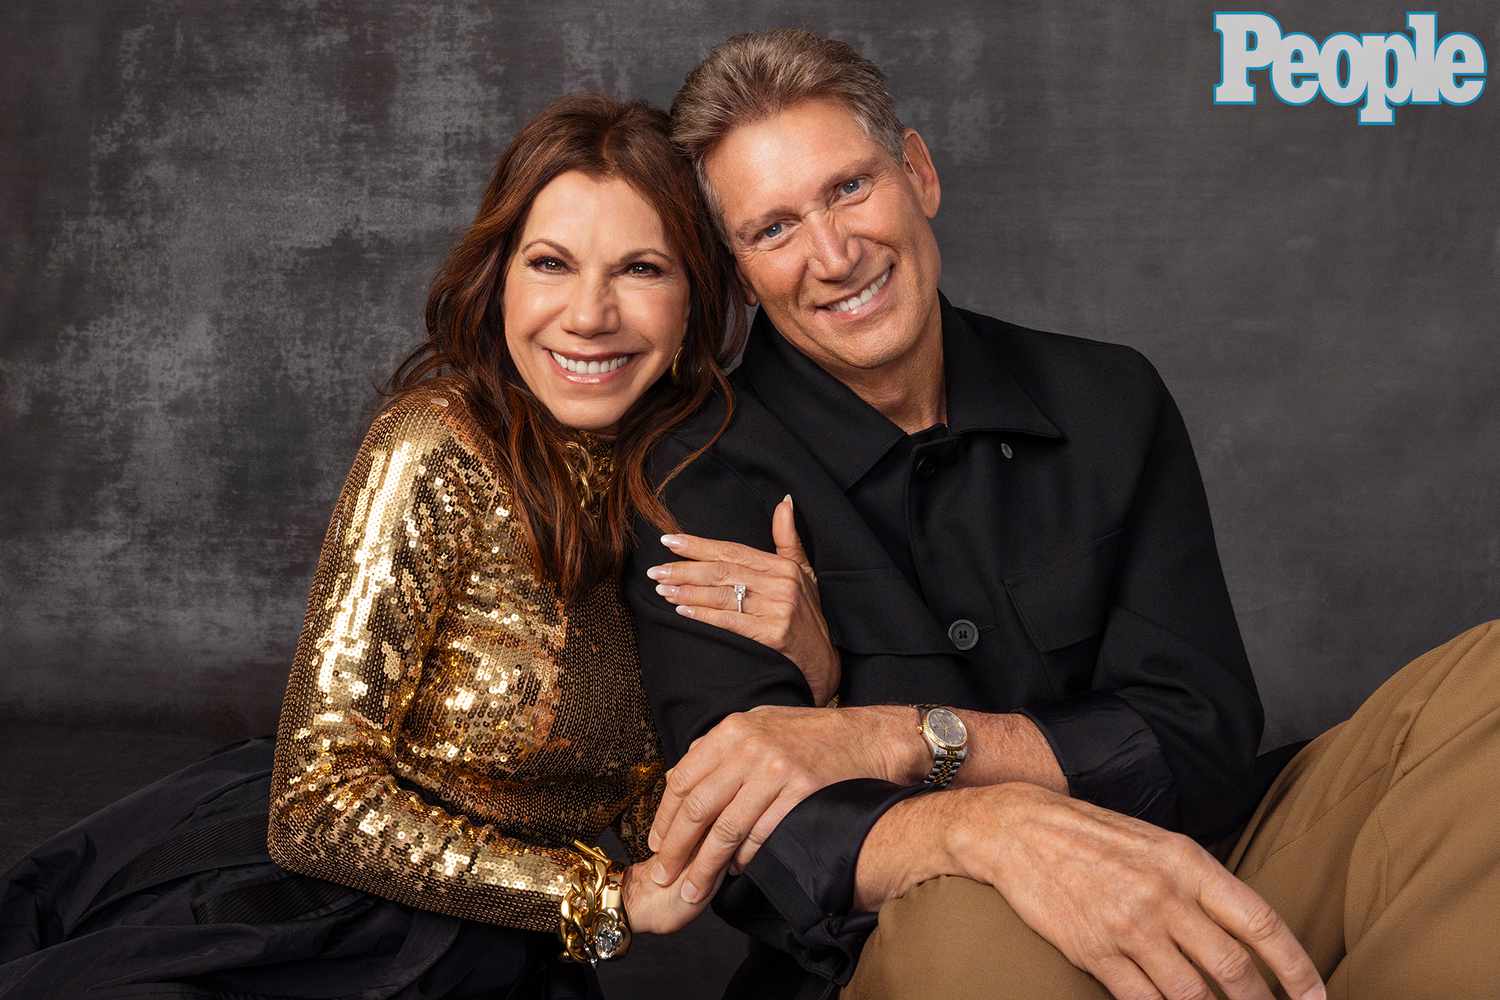 Gerry Turner and Theresa Nist pose for the PEOPLE Magazine